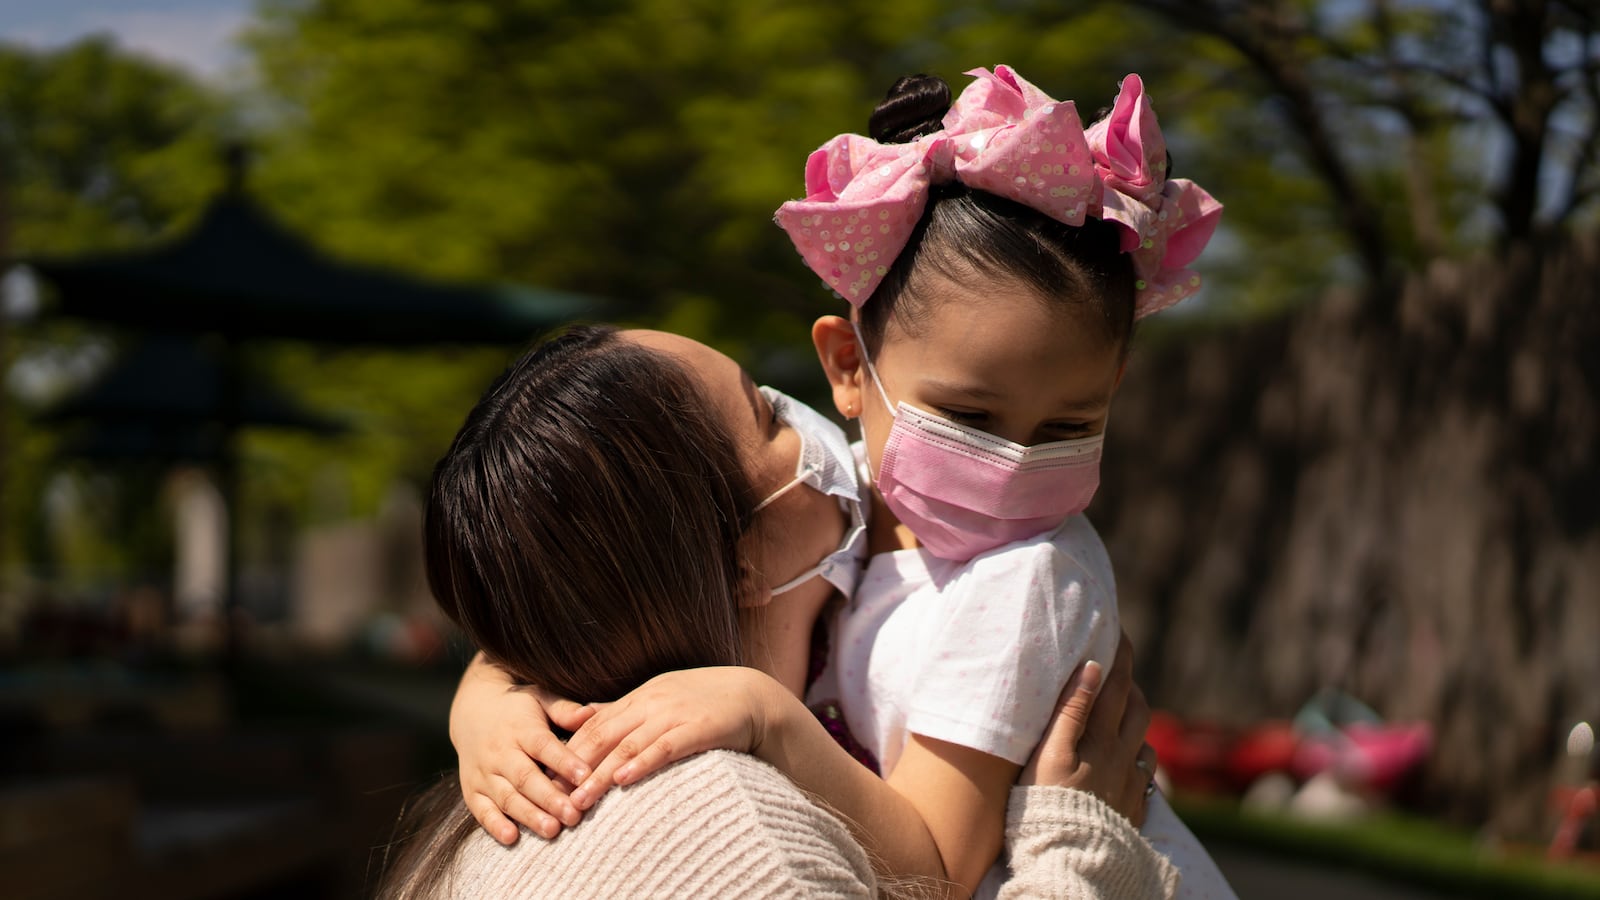 A mother wearing a tan shirt and a protective mask holds her daughter, who is wearing a white shirt, pink mask and pink polka-dot bow. The background is a swirl of green trees.